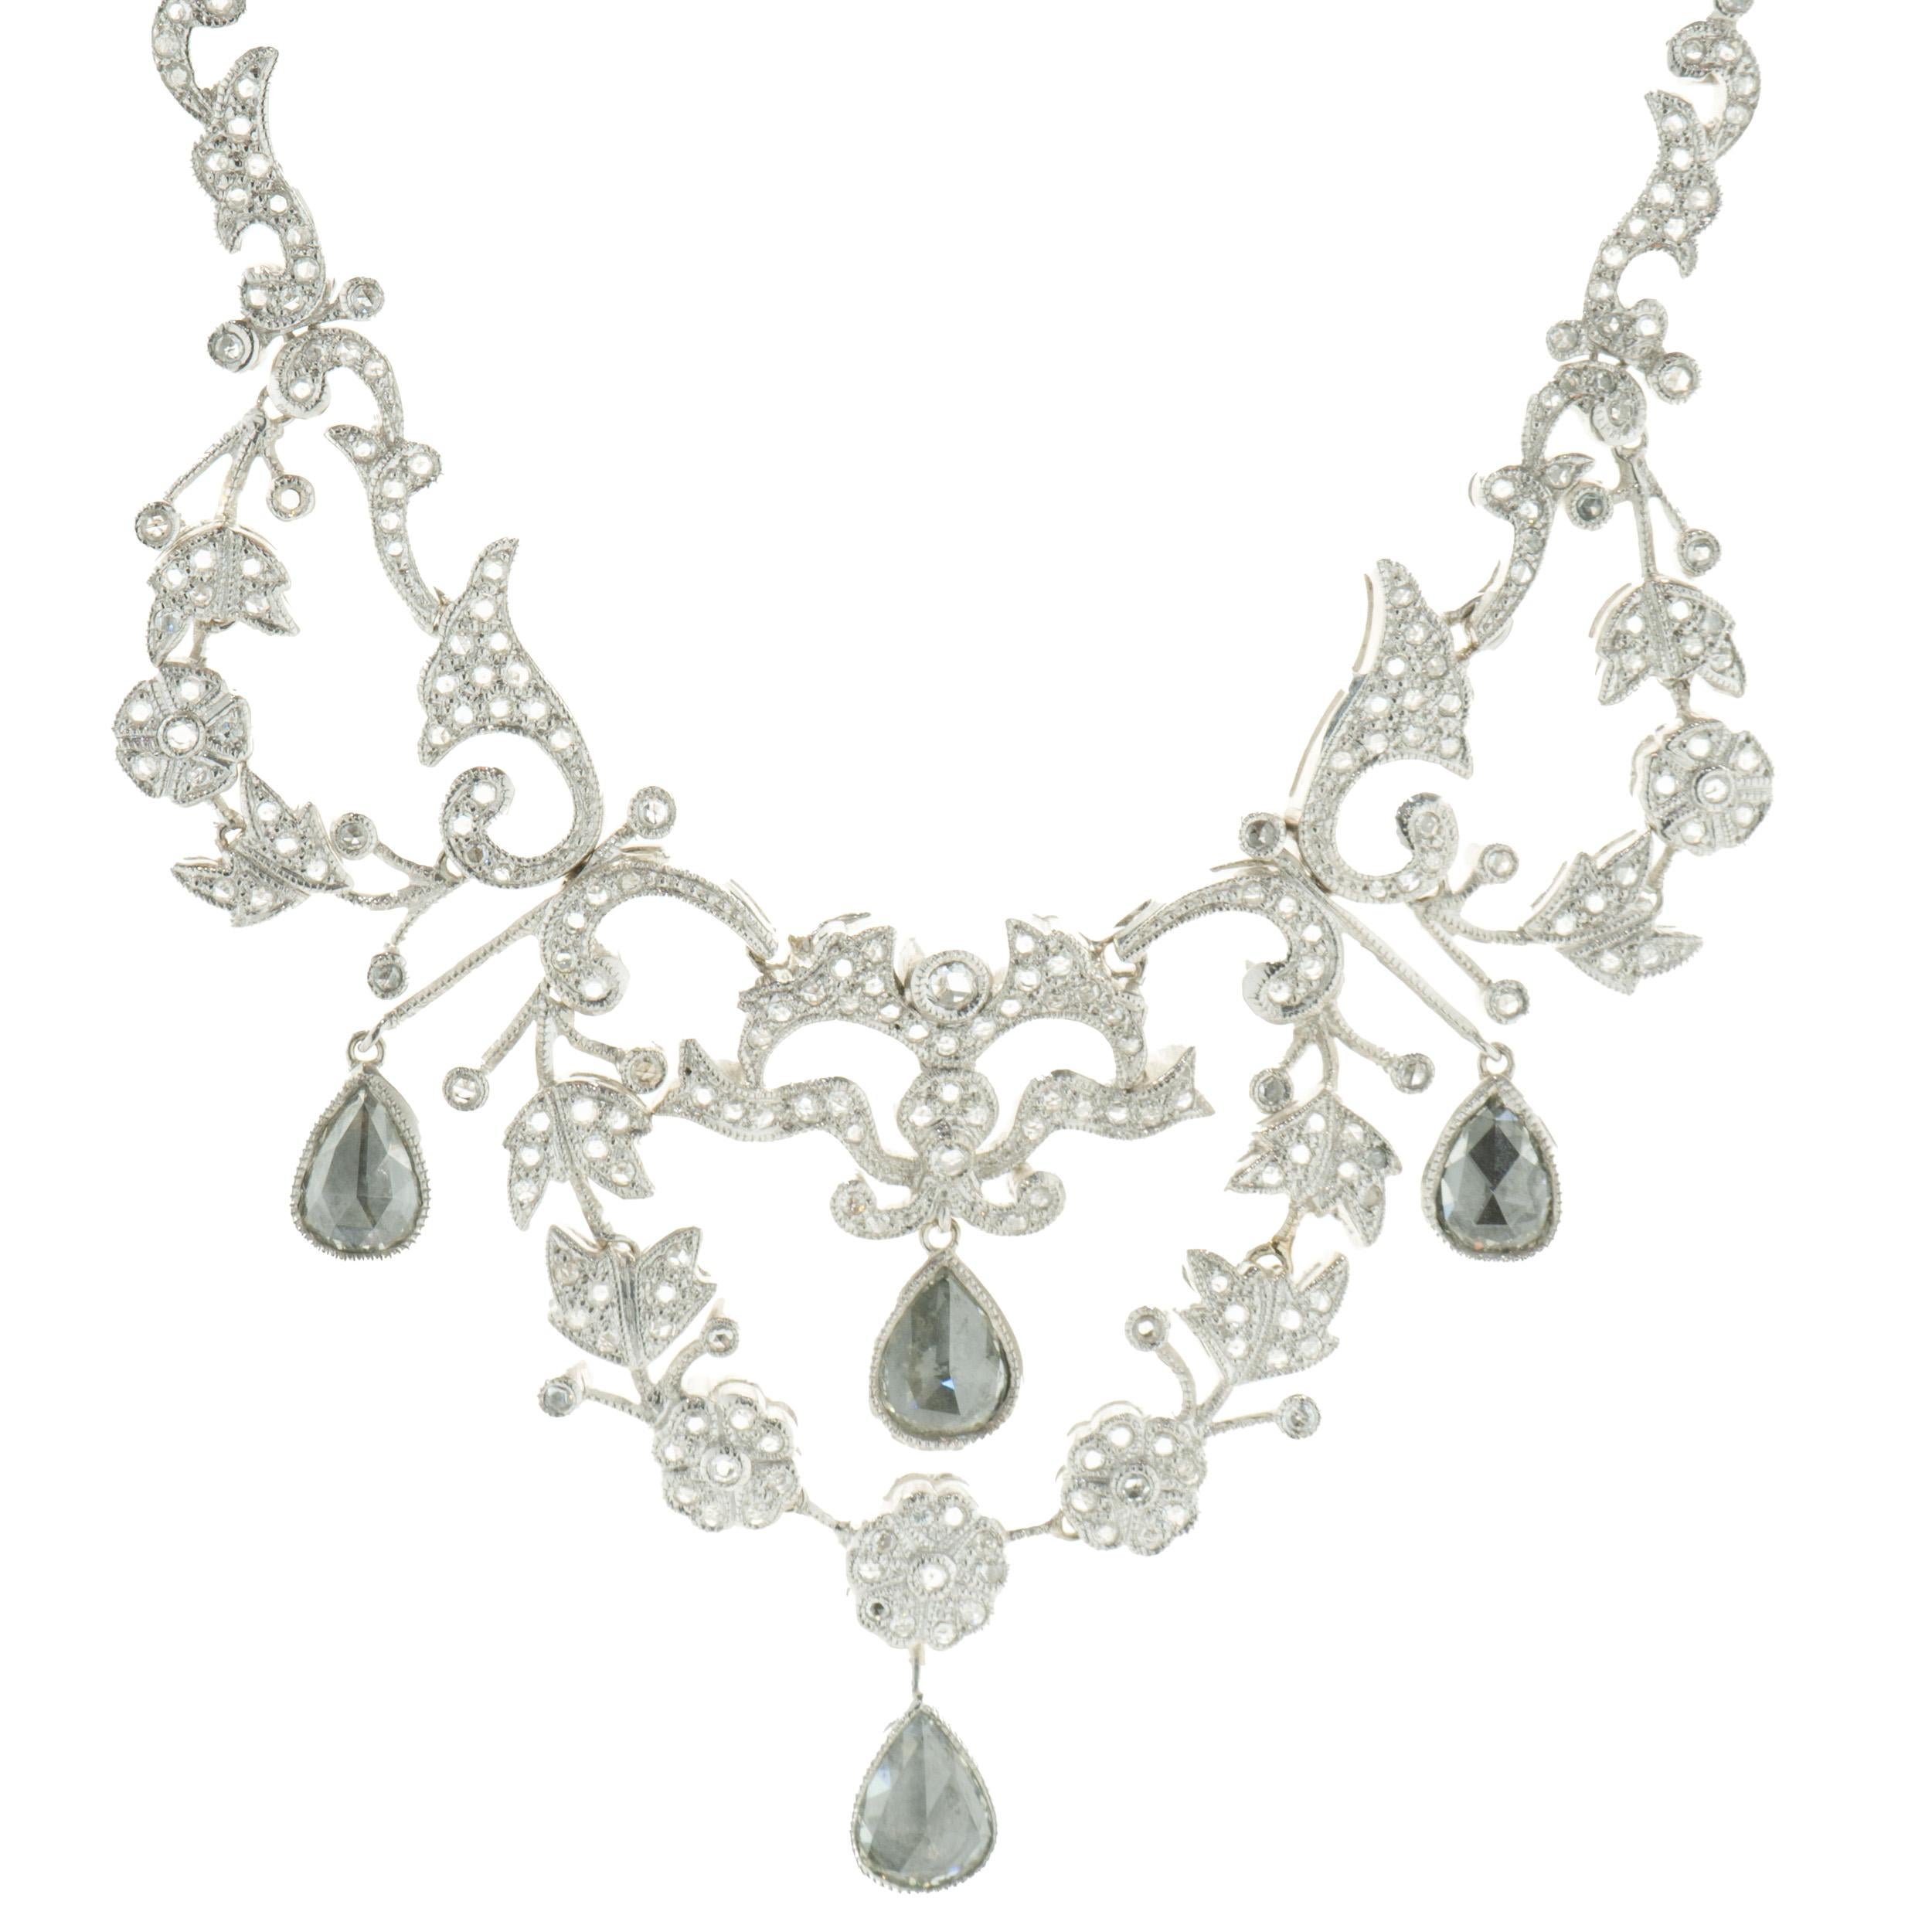 Designer: custom
Material: 18K white gold
Diamonds: round and pear rose cut = 3.49cttw
Color: H / I
Clarity: SI1-2
Dimensions: necklace measures 18-inches in length 
Weight: 26.6 grams